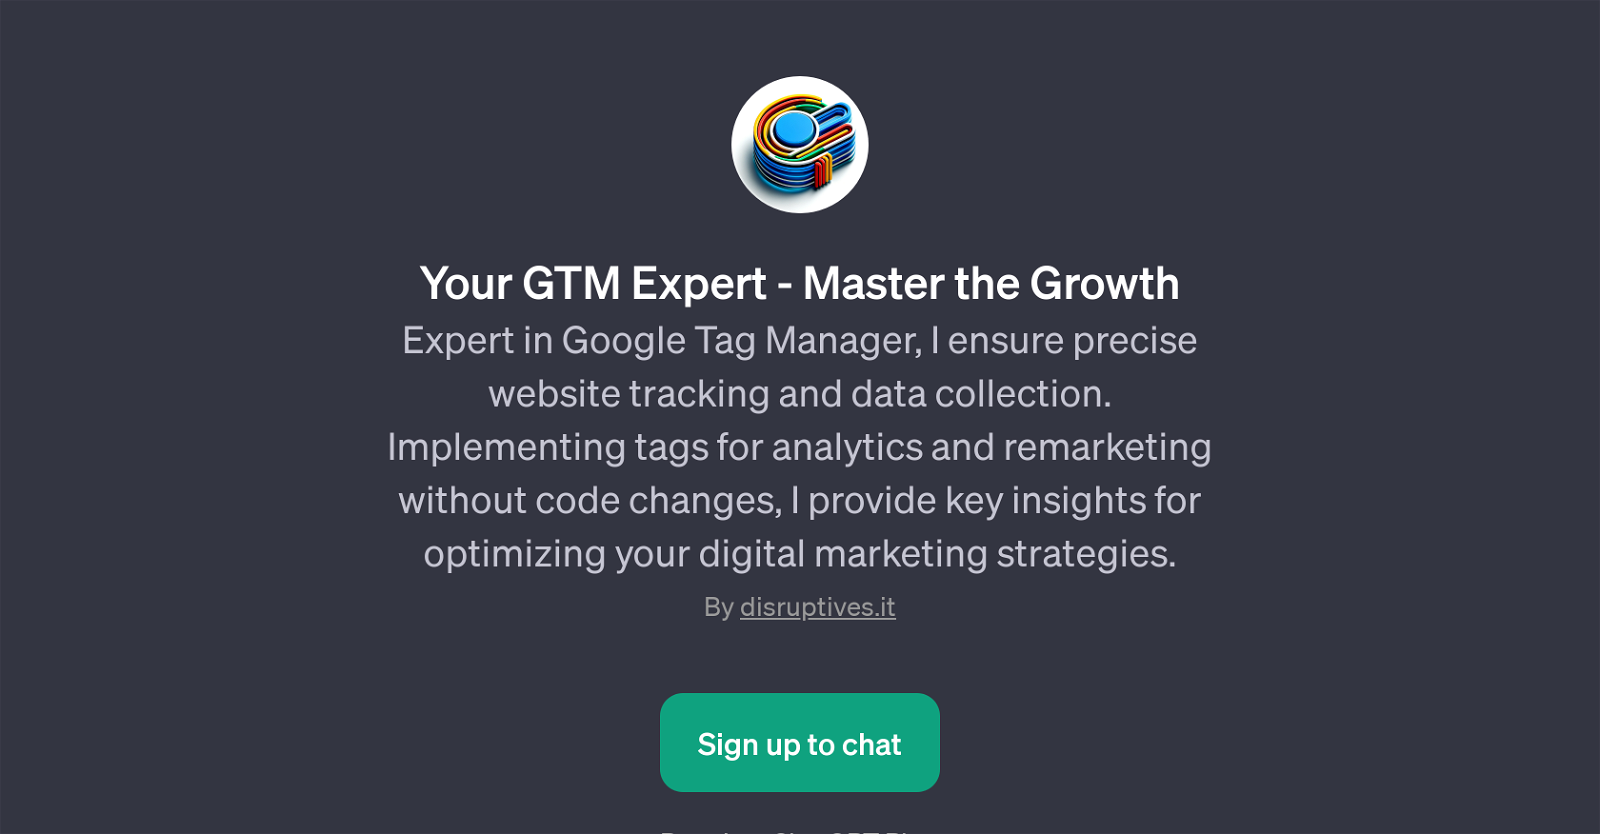 Your GTM Expert - Master the Growth website